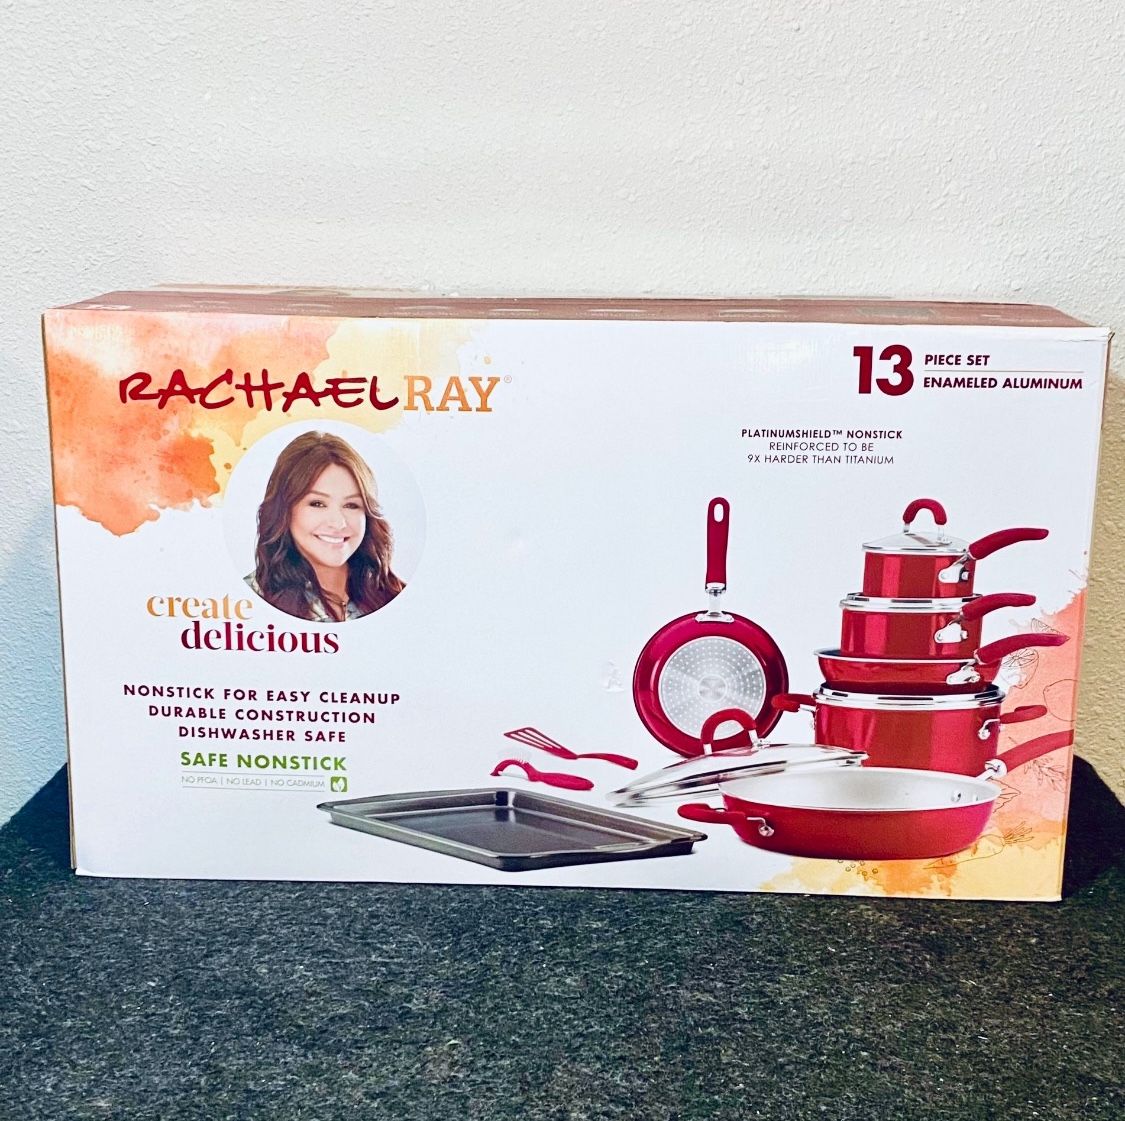 New Rachael Ray Create Delicious 13Pc Enameled Aluminum Nonstick Cookware Set, Red